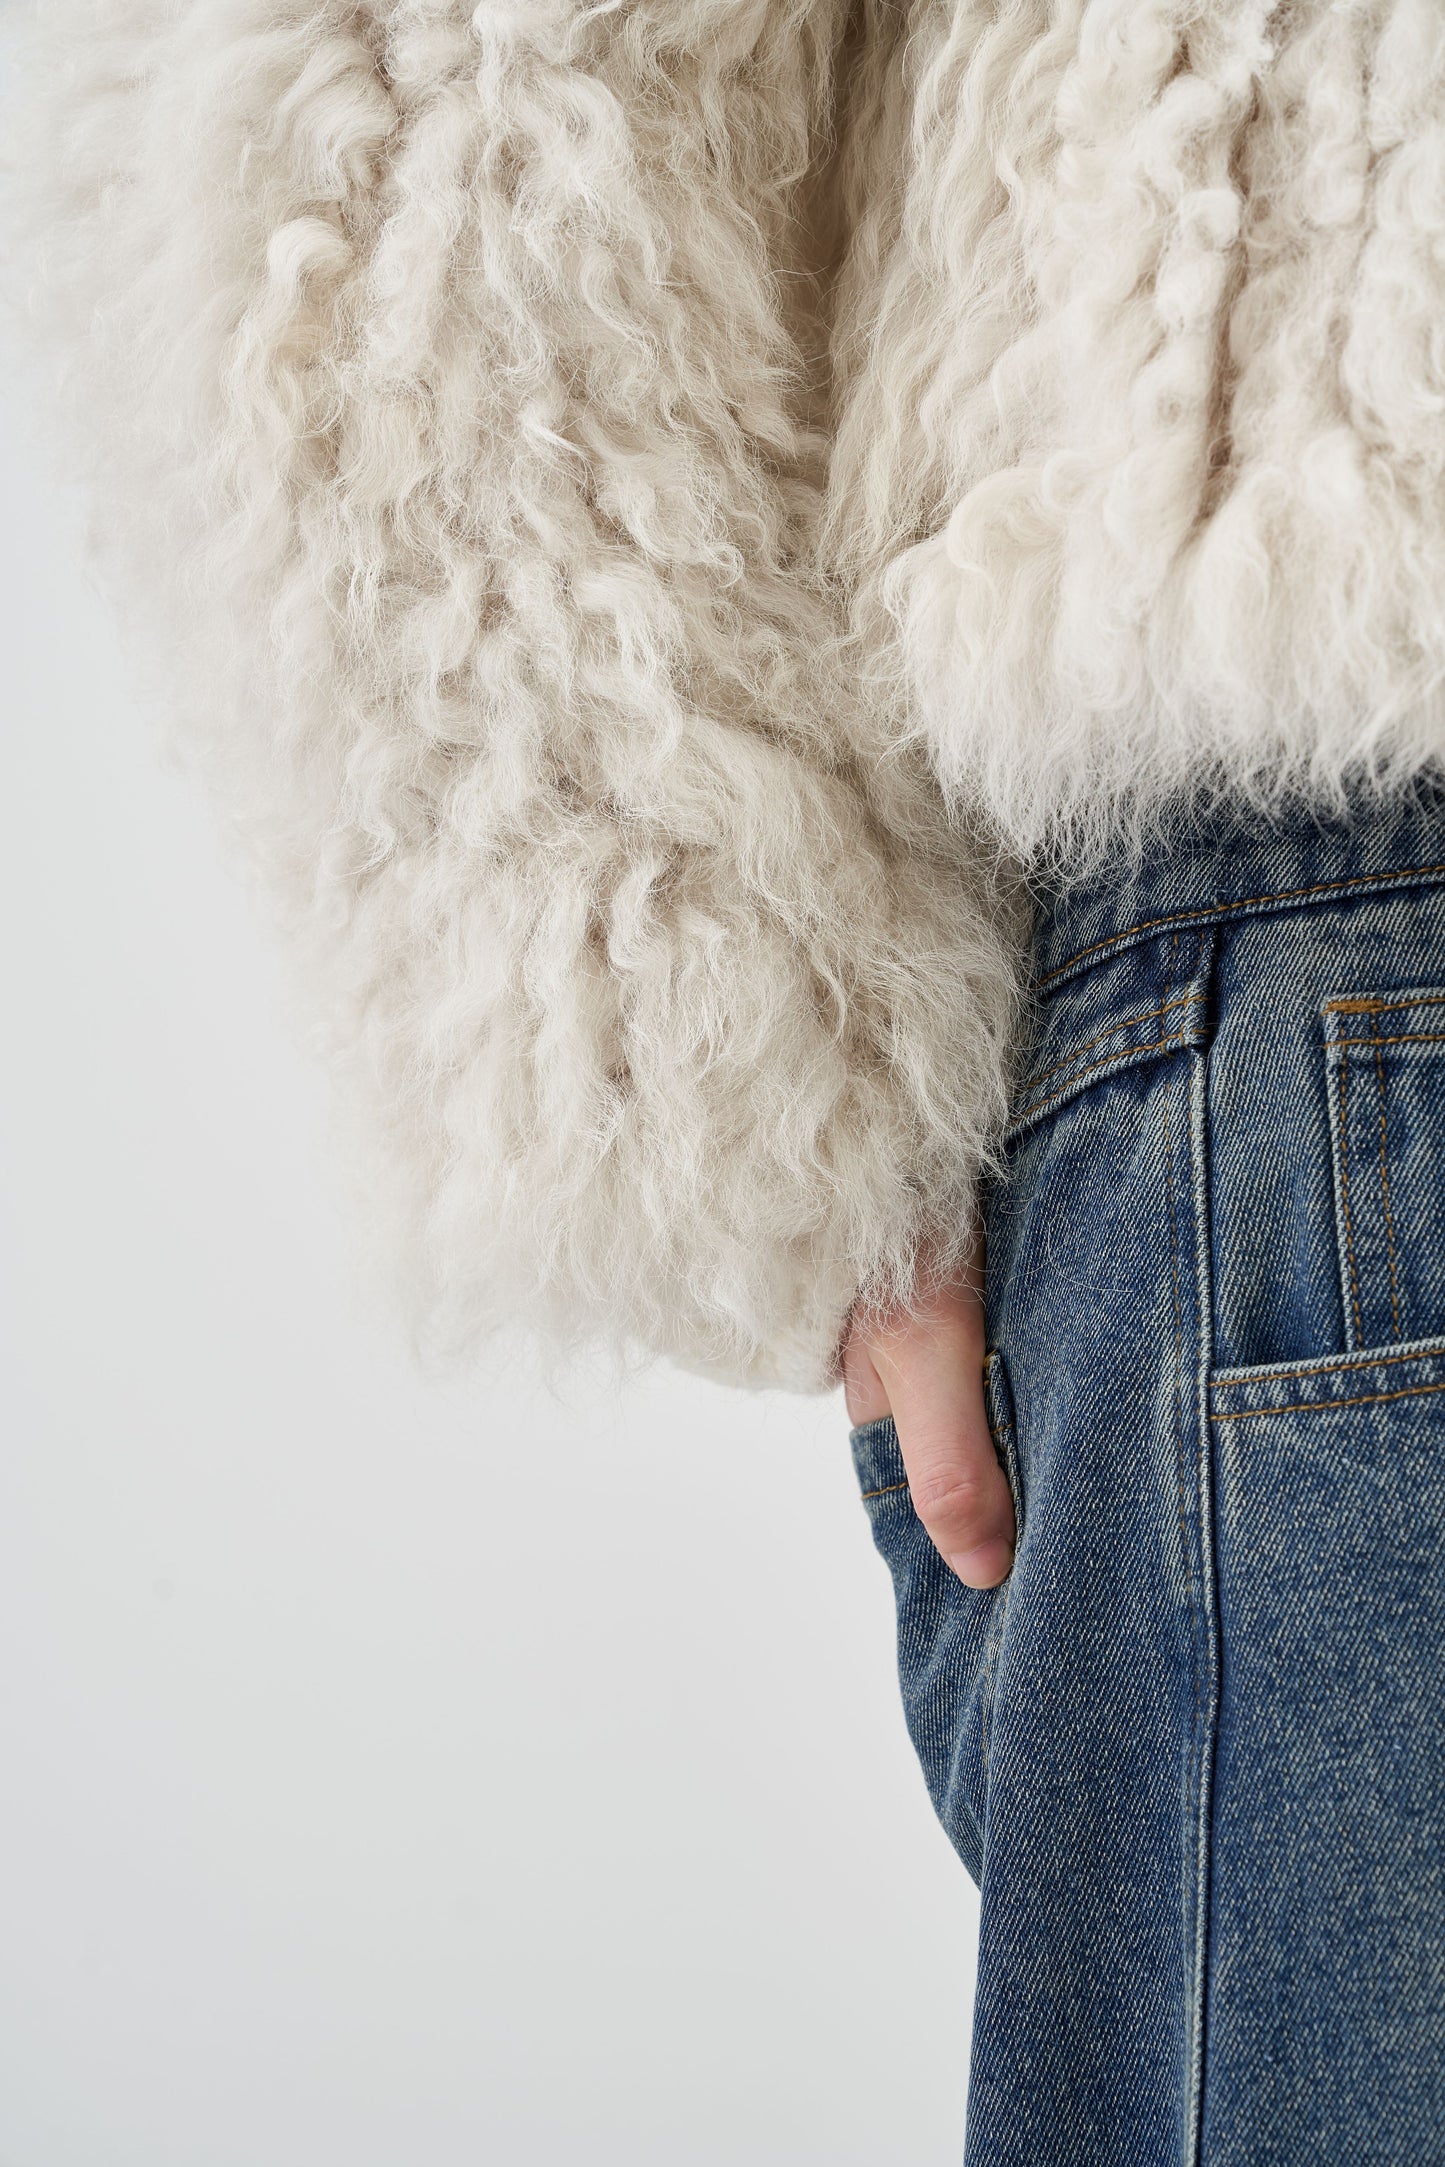 Small V-Neck Wool Fur High-Waisted Coat